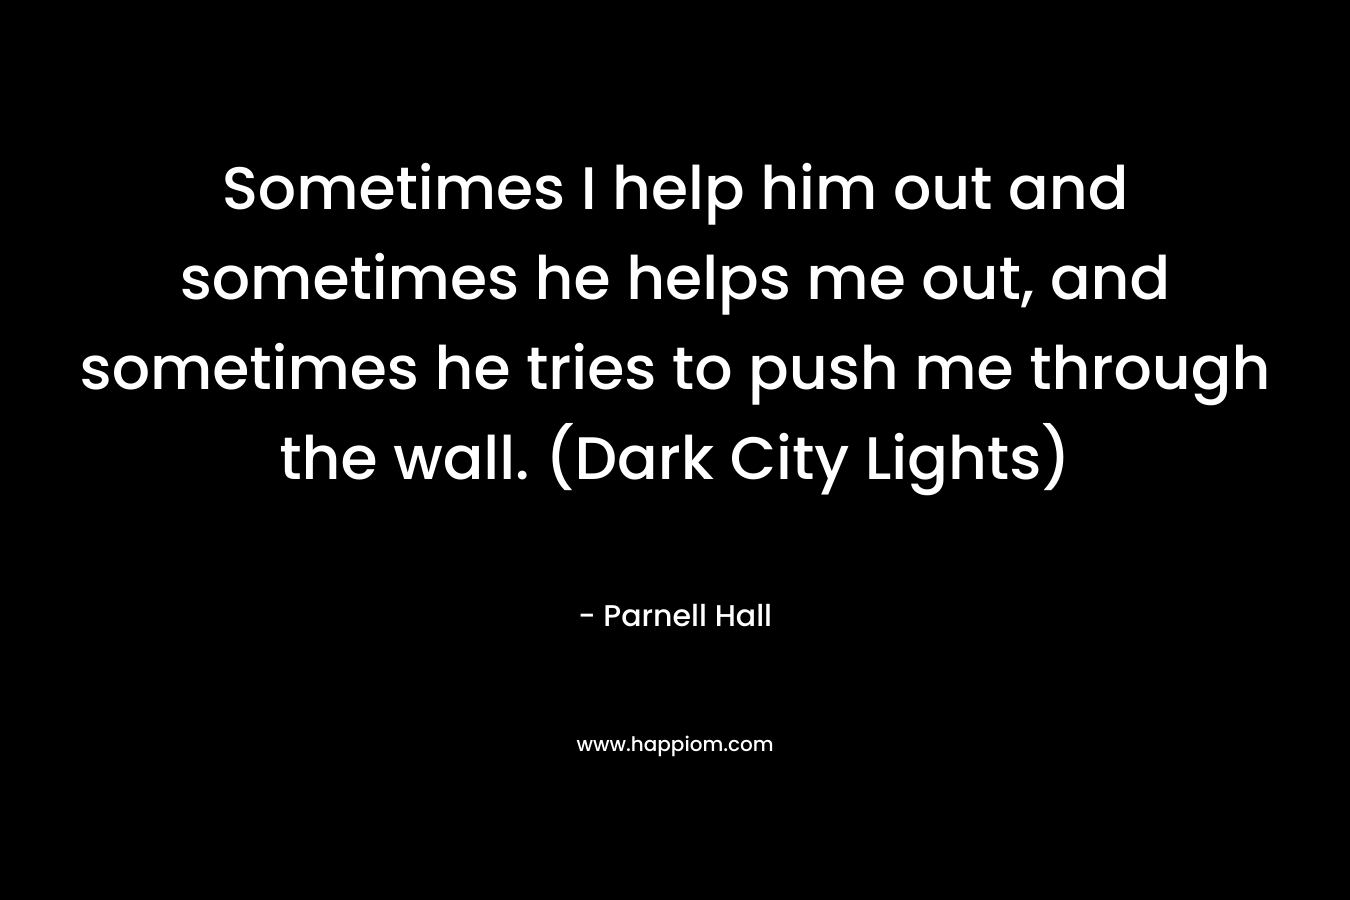 Sometimes I help him out and sometimes he helps me out, and sometimes he tries to push me through the wall. (Dark City Lights) – Parnell Hall